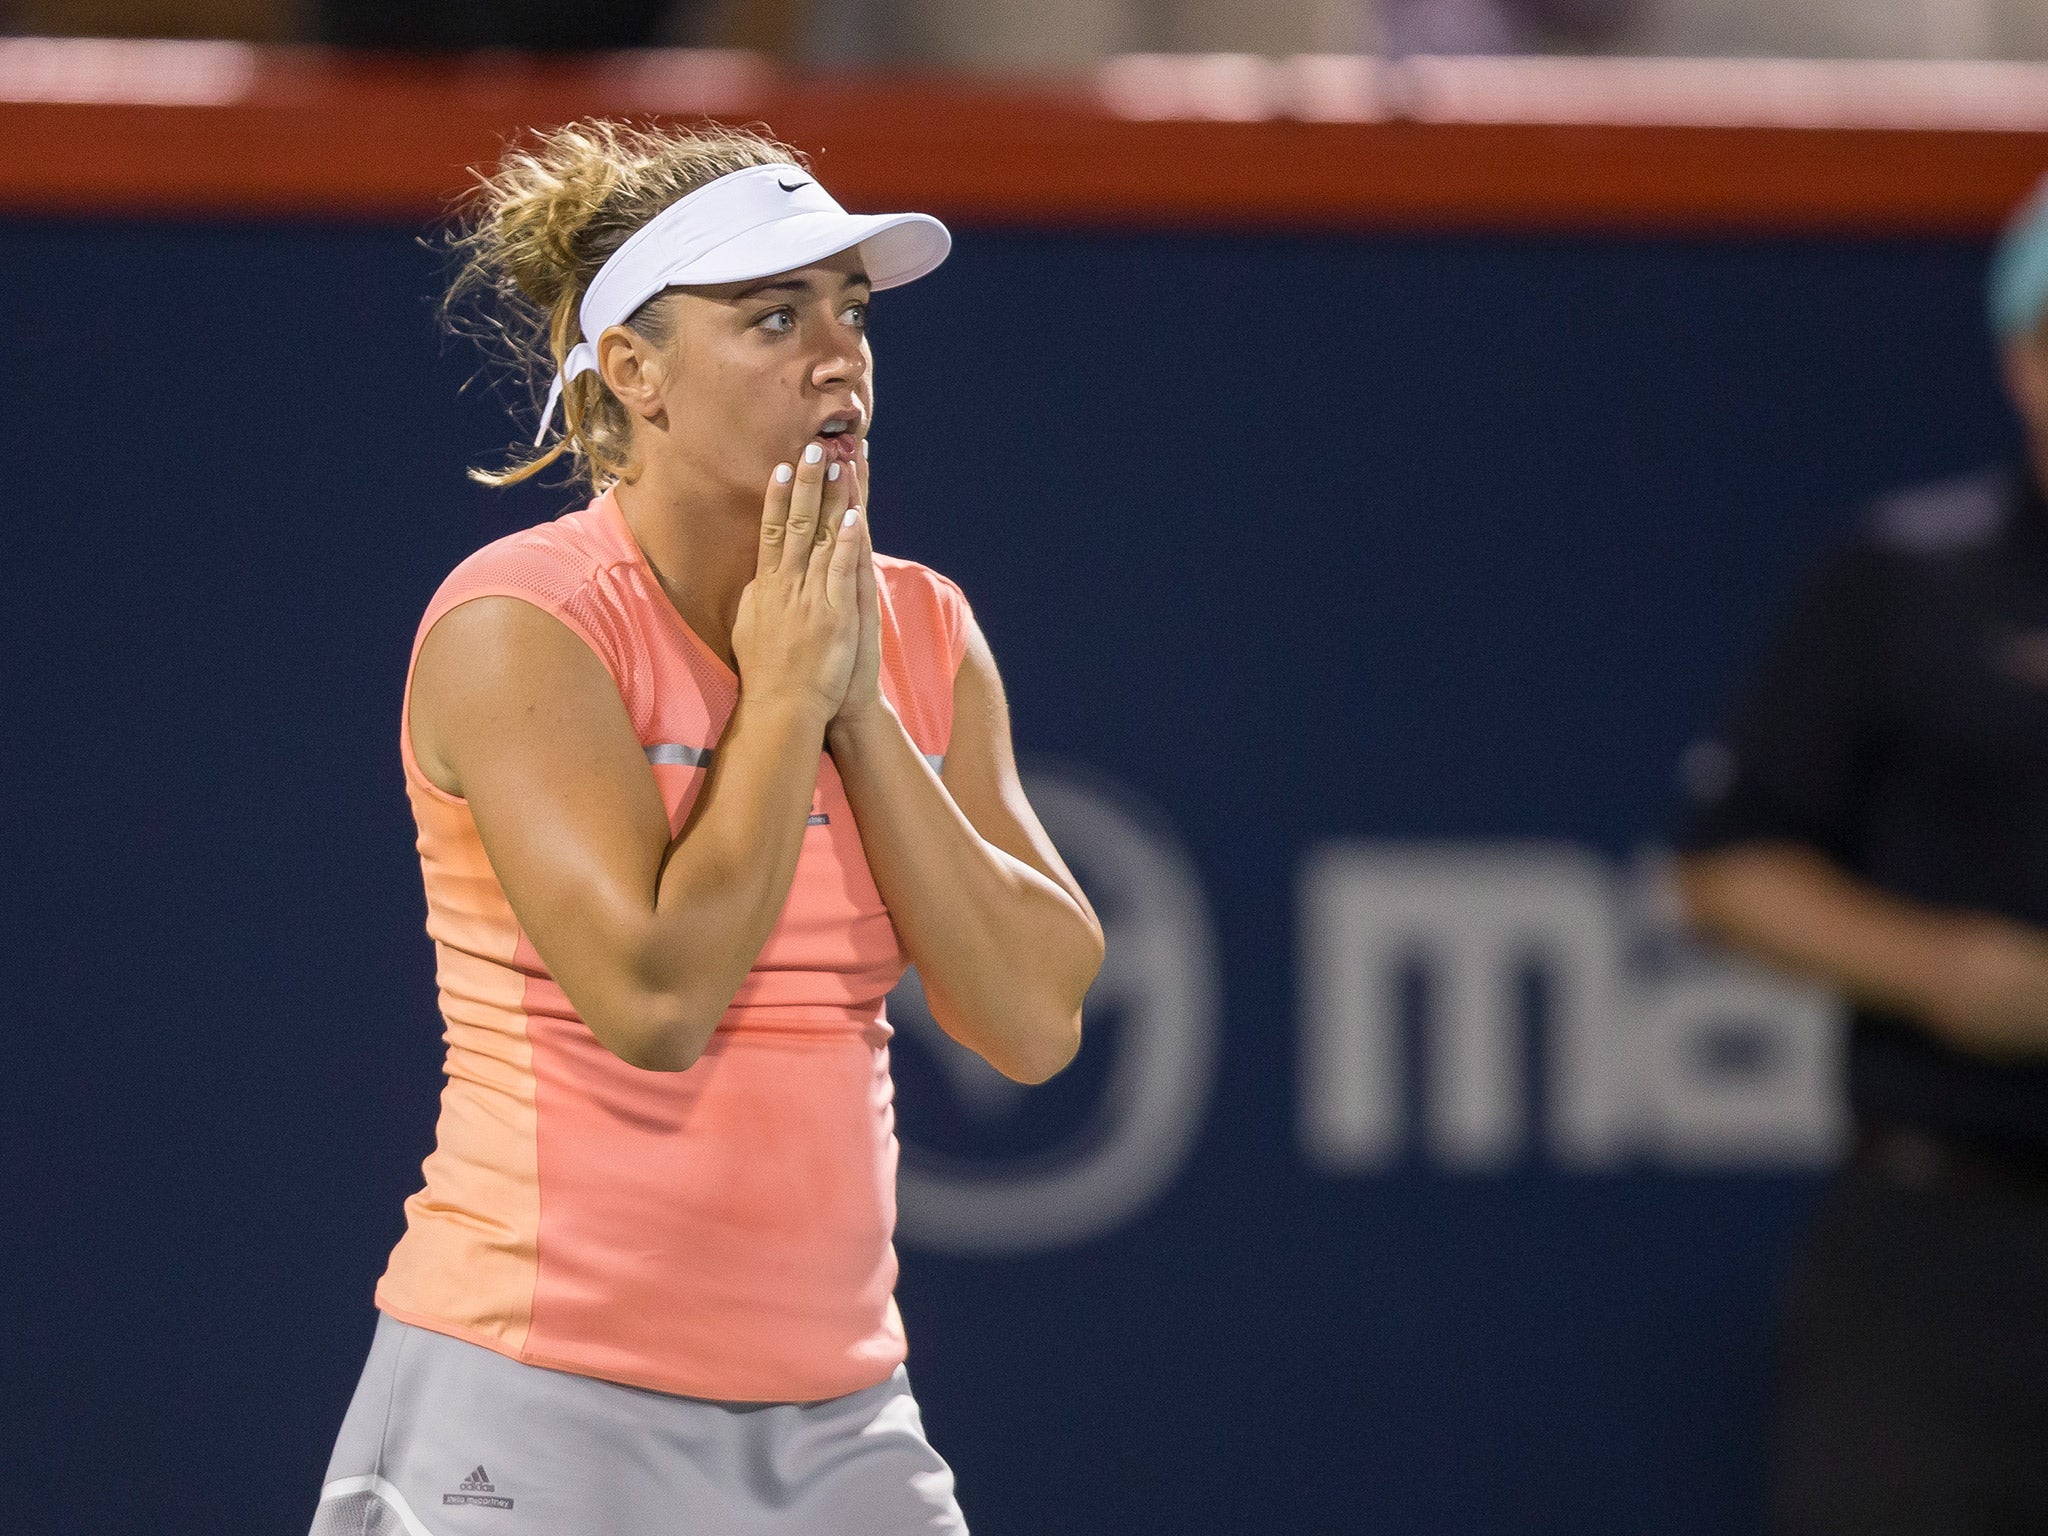 Kristina Kucova reacts to beating Konta in the Rogers Cup quarter-final